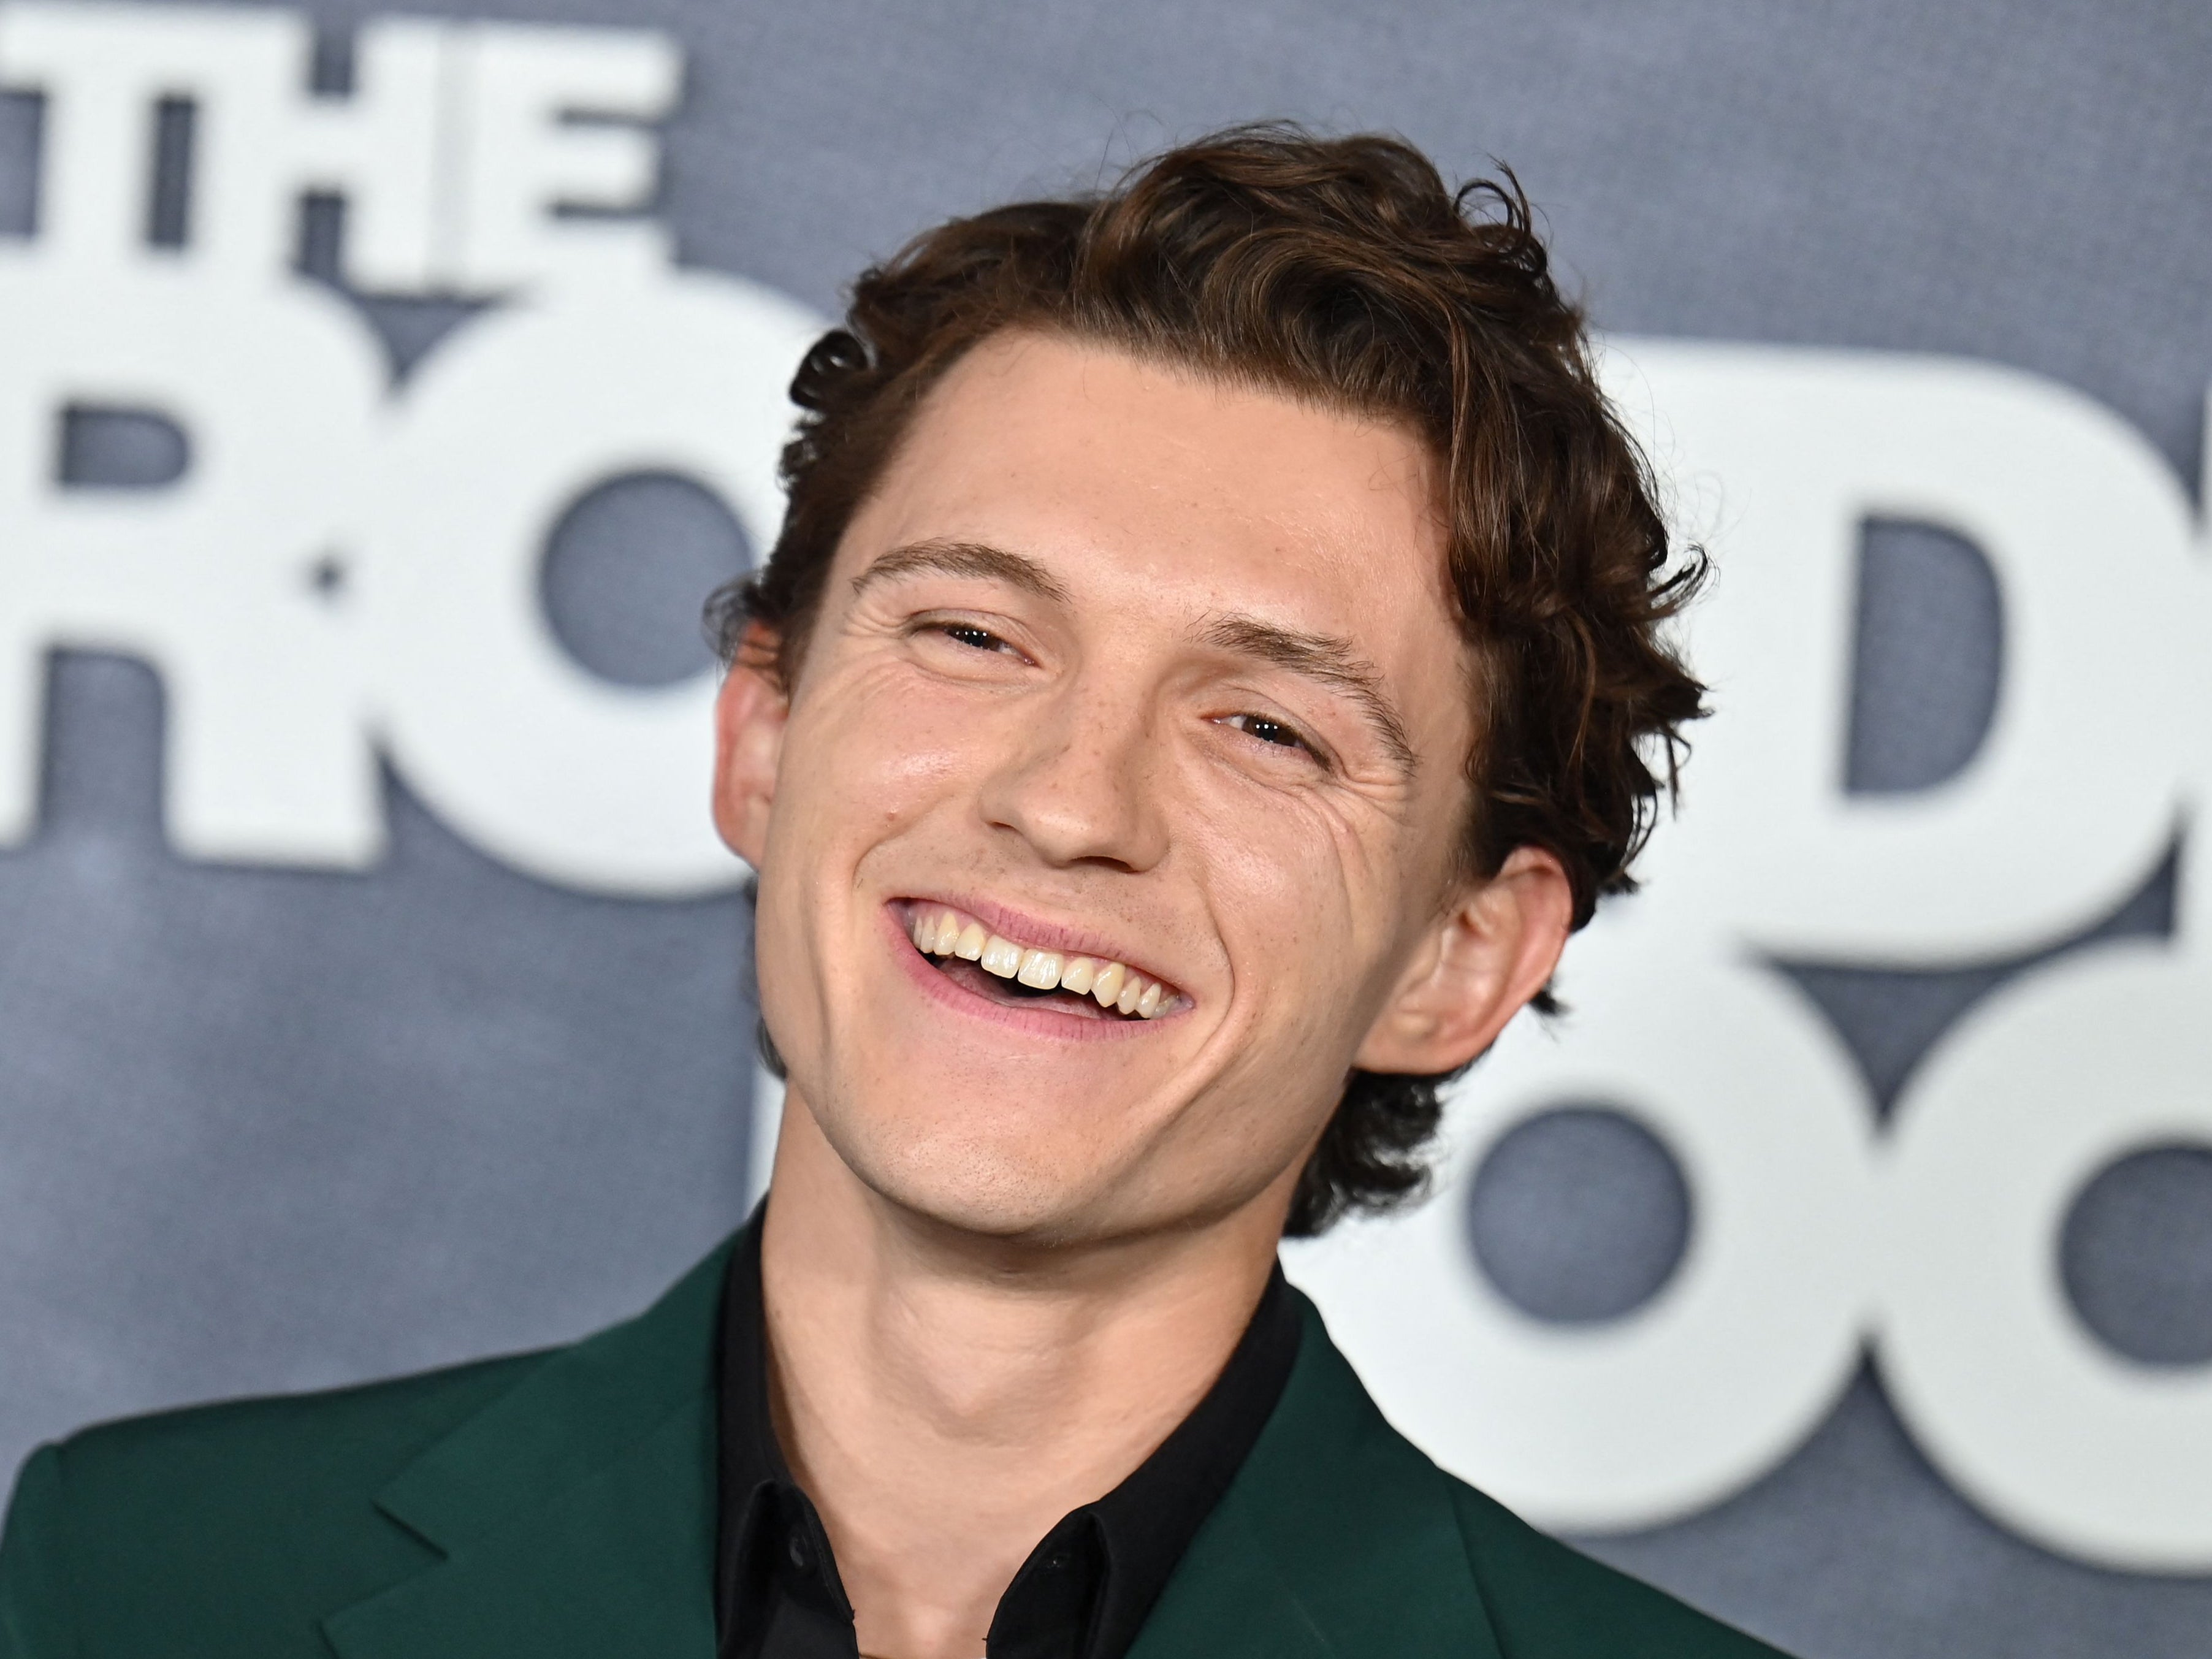 Gap year: Tom Holland is embarking on a year away from the film industry